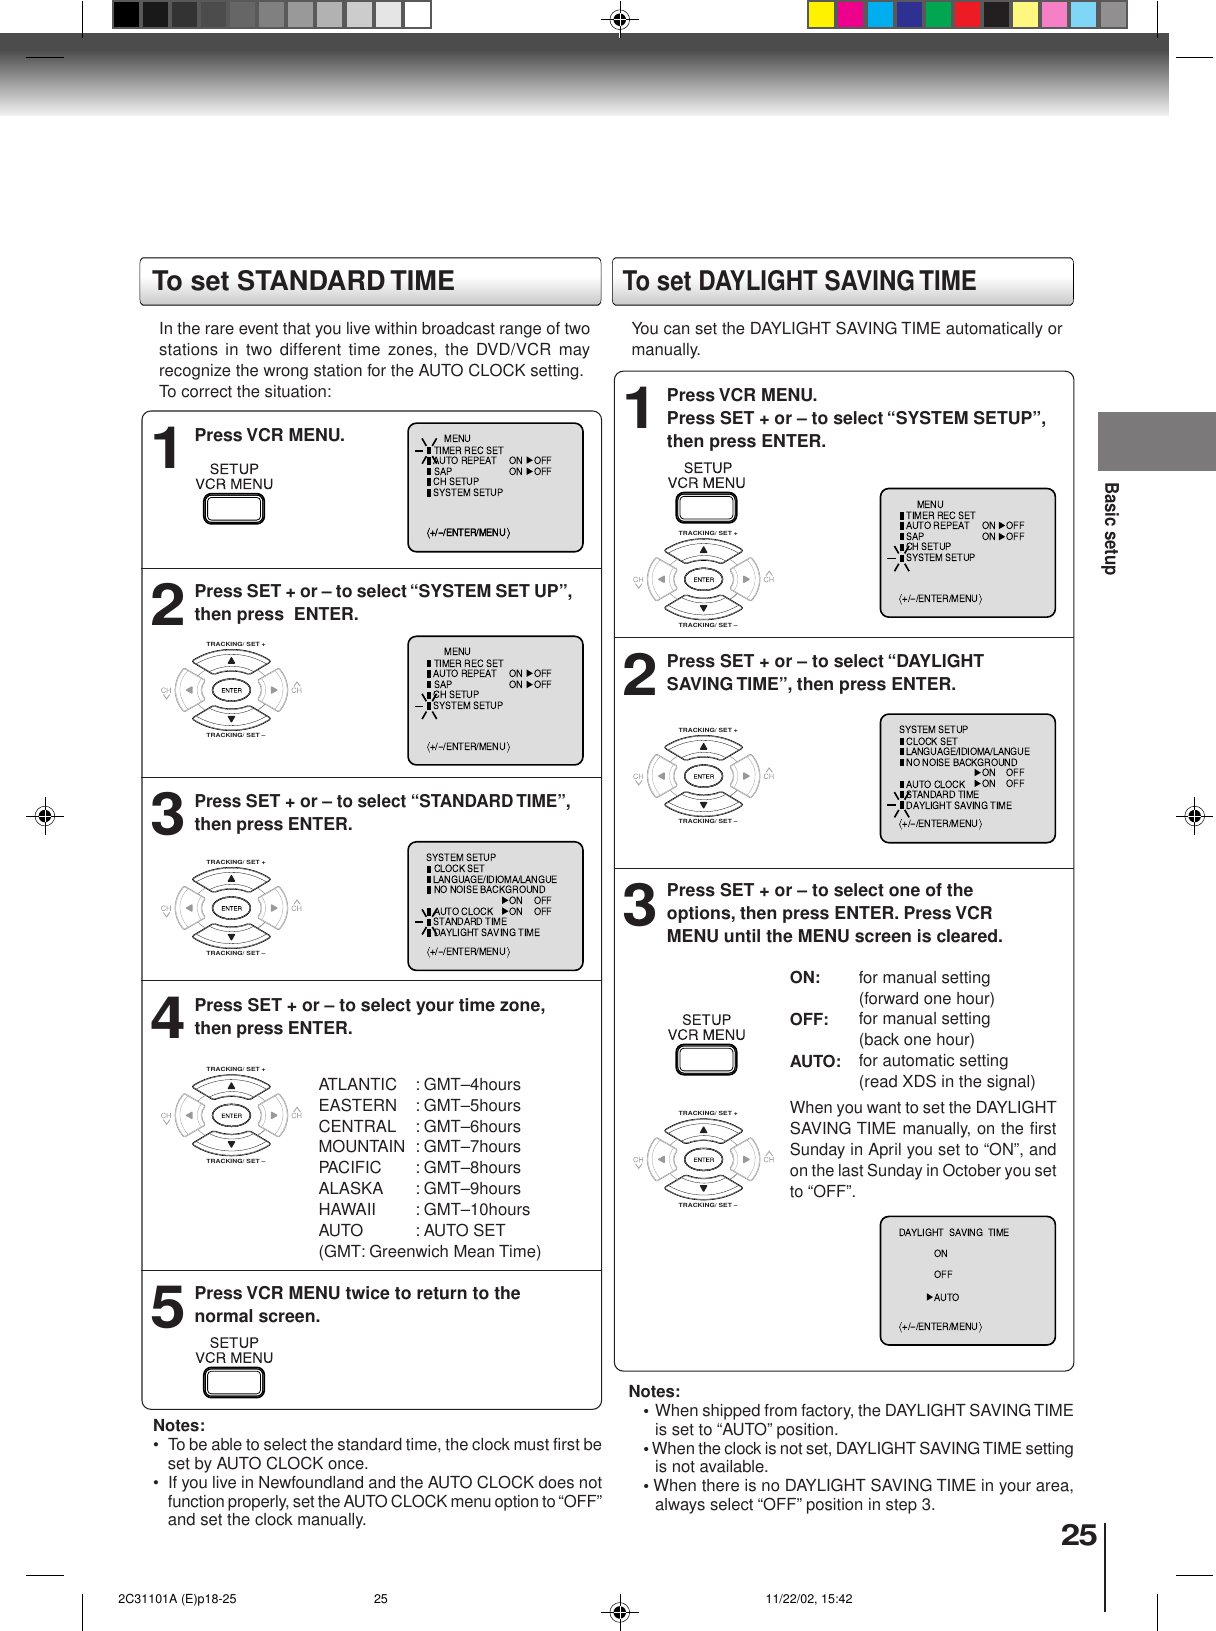 25Basic setupPress VCR MENU.1Press SET + or – to select “SYSTEM SET UP”,then press  ENTER.2Press SET + or – to select “STANDARD TIME”,then press ENTER.3Press SET + or – to select your time zone,then press ENTER.4Press VCR MENU twice to return to thenormal screen.5In the rare event that you live within broadcast range of twostations in two different time zones, the DVD/VCR mayrecognize the wrong station for the AUTO CLOCK setting.To correct the situation:Notes:• To be able to select the standard time, the clock must first beset by AUTO CLOCK once.•If you live in Newfoundland and the AUTO CLOCK does notfunction properly, set the AUTO CLOCK menu option to “OFF”and set the clock manually.Press VCR MENU.Press SET + or – to select “SYSTEM SETUP”,then press ENTER.1Press SET + or – to select “DAYLIGHTSAVING TIME”, then press ENTER.2Press SET + or – to select one of theoptions, then press ENTER. Press VCRMENU until the MENU screen is cleared.3Notes:•When shipped from factory, the DAYLIGHT SAVING TIMEis set to “AUTO” position.• When the clock is not set, DAYLIGHT SAVING TIME settingis not available.• When there is no DAYLIGHT SAVING TIME in your area,always select “OFF” position in step 3.When you want to set the DAYLIGHTSAVING TIME manually, on the firstSunday in April you set to “ON”, andon the last Sunday in October you setto “OFF”.ON:OFF:AUTO:for manual setting(forward one hour)for manual setting(back one hour)for automatic setting(read XDS in the signal)ATLANTIC : GMT–4hoursEASTERN : GMT–5hoursCENTRAL : GMT–6hoursMOUNTAIN : GMT–7hoursPACIFIC : GMT–8hoursALASKA : GMT–9hoursHAWAII : GMT–10hoursAUTO : AUTO SET(GMT: Greenwich Mean Time)To set DAYLIGHT SAVING TIMEYou can set the DAYLIGHT SAVING TIME automatically ormanually.To set STANDARD TIMETRACKING/ SET +TRACKING/ SET –TRACKING/ SET +TRACKING/ SET –TRACKING/ SET +TRACKING/ SET –TRACKING/ SET +TRACKING/ SET –TRACKING/ SET +TRACKING/ SET –TRACKING/ SET +TRACKING/ SET –  2C31101A (E)p18-25 11/22/02, 15:4225